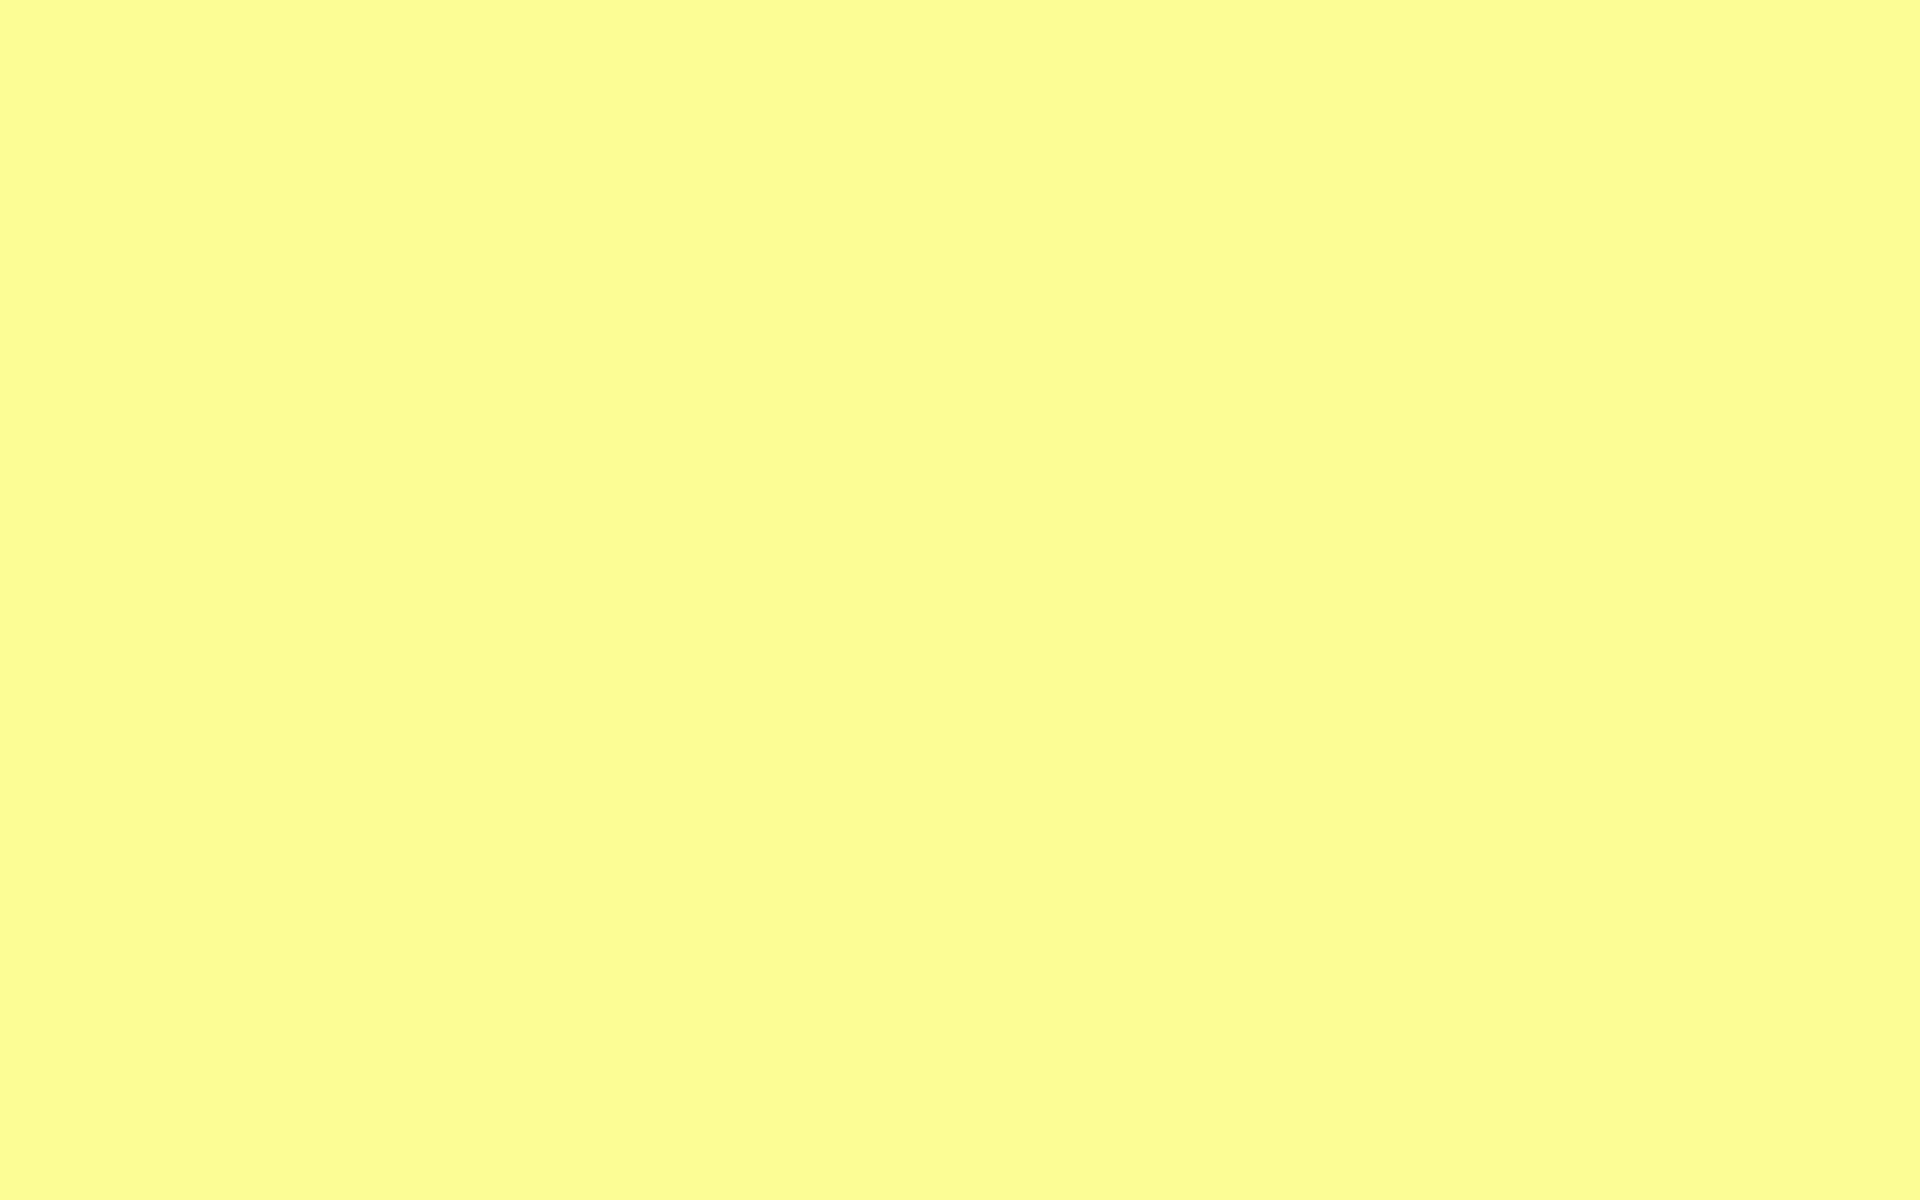 Yellow Solid Color Background With Matte Texture Wallpaper Design Yellow  Matte Surface Stock Photo Picture And Royalty Free Image Image 126216016